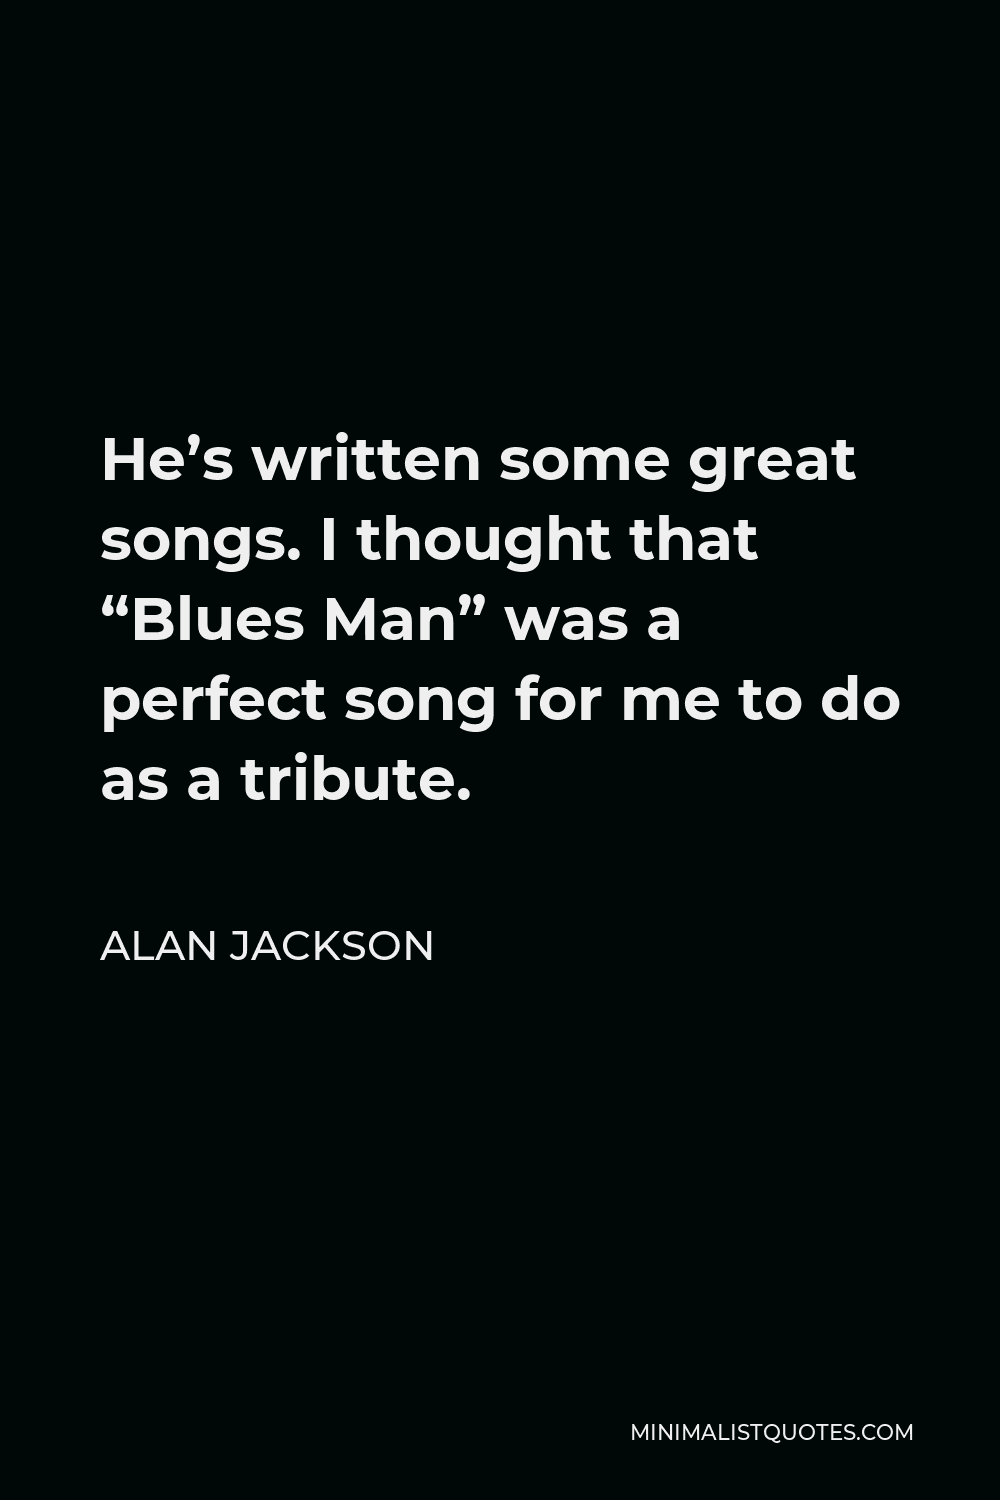 Alan Jackson Quote - He’s written some great songs. I thought that “Blues Man” was a perfect song for me to do as a tribute.